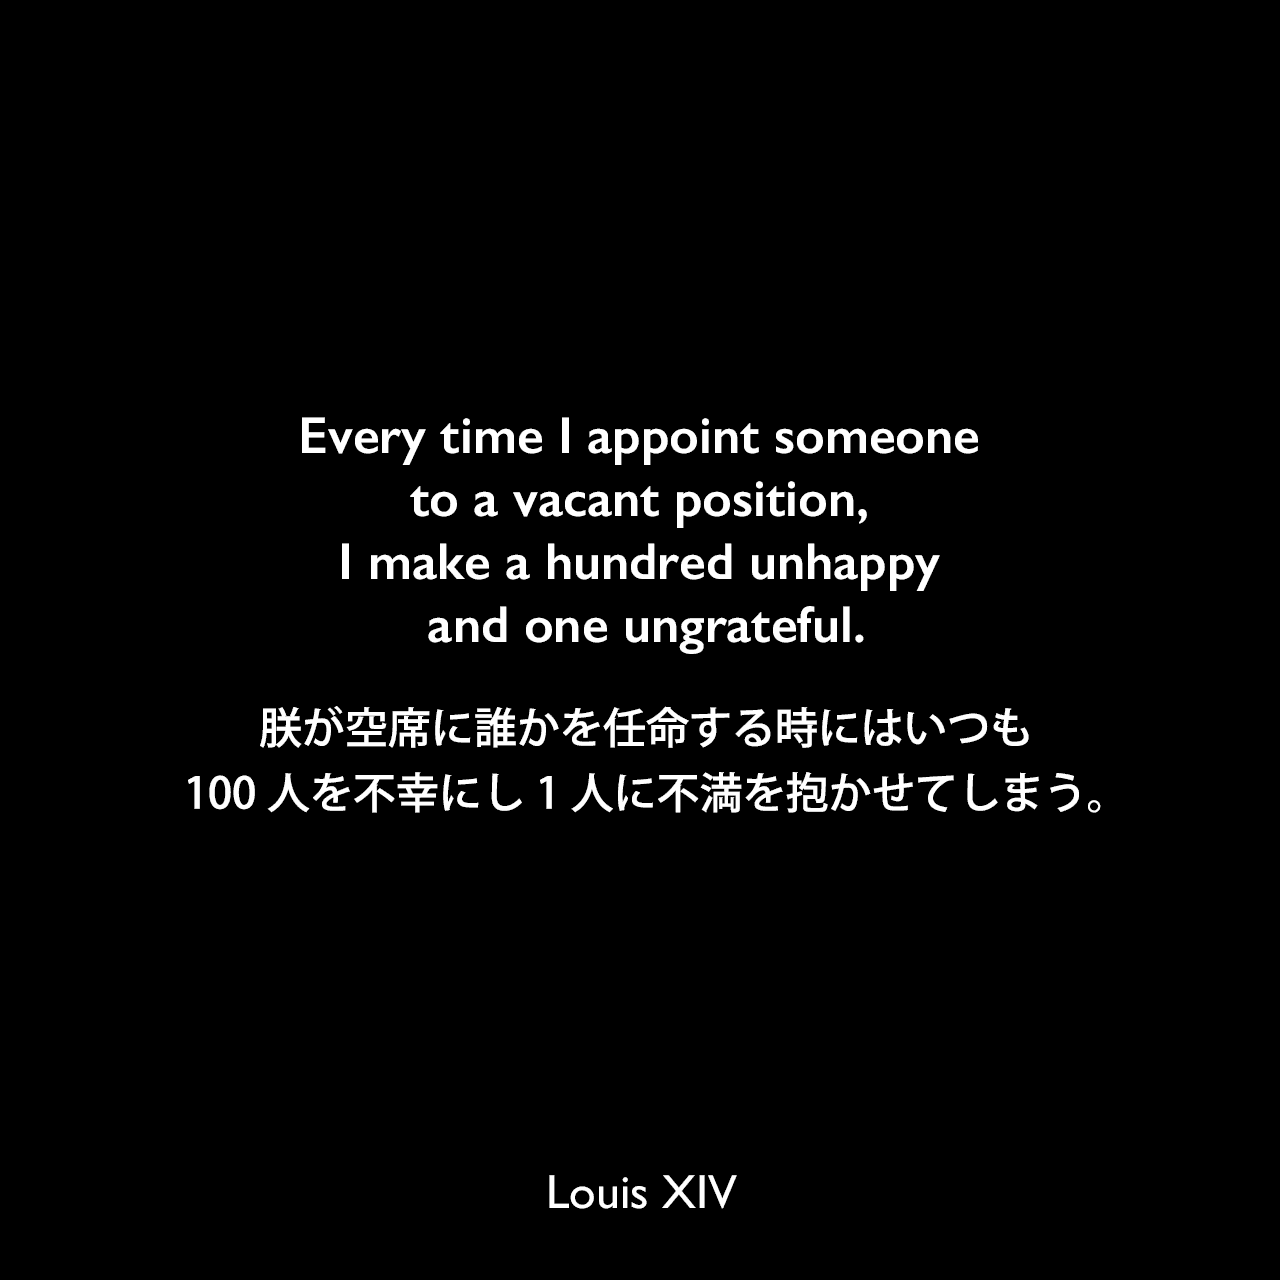 Every time I appoint someone to a vacant position, I make a hundred unhappy and one ungrateful.朕が空席に誰かを任命する時にはいつも、100人を不幸にし1人に不満を抱かせてしまう。Louis XIV